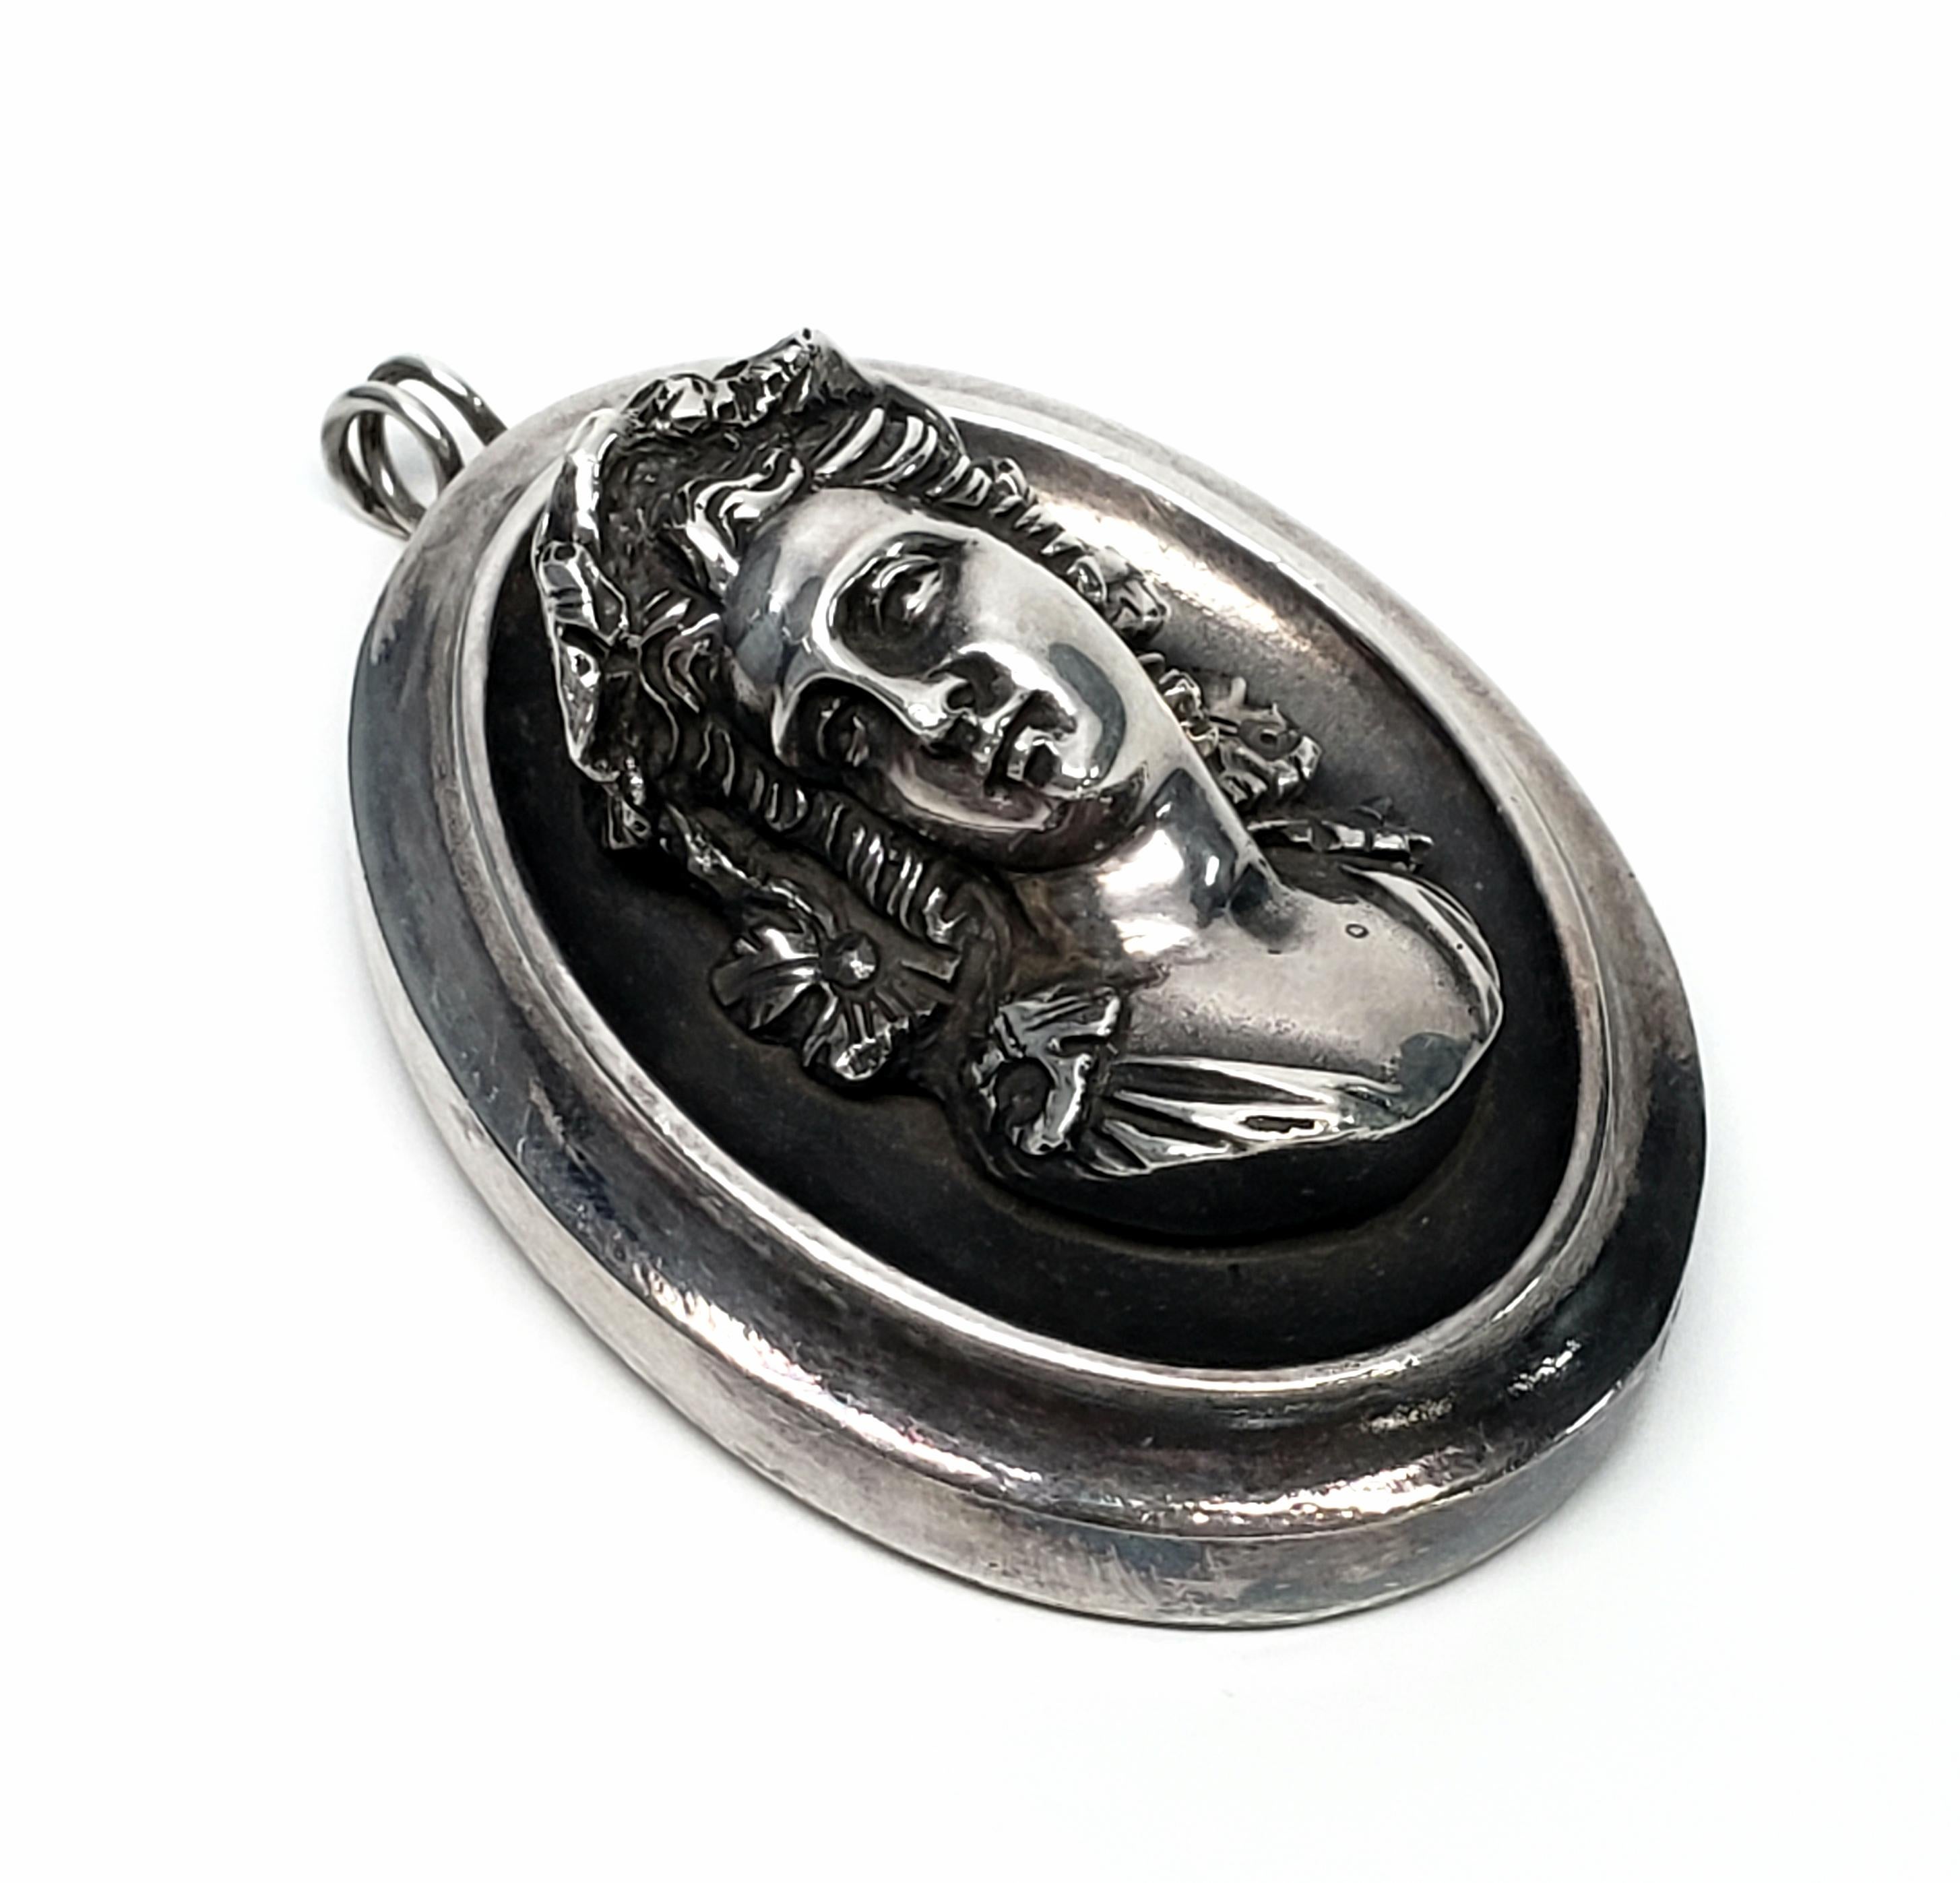 Vintage sterling silver pendant by Henryk Winograd featuring a repousse cameo of a lady's head.

Henryk Winograd was a leader in America in the art of Repousse. He used sheets of fine silver and hand crafted sharp, high relief designs. His work is